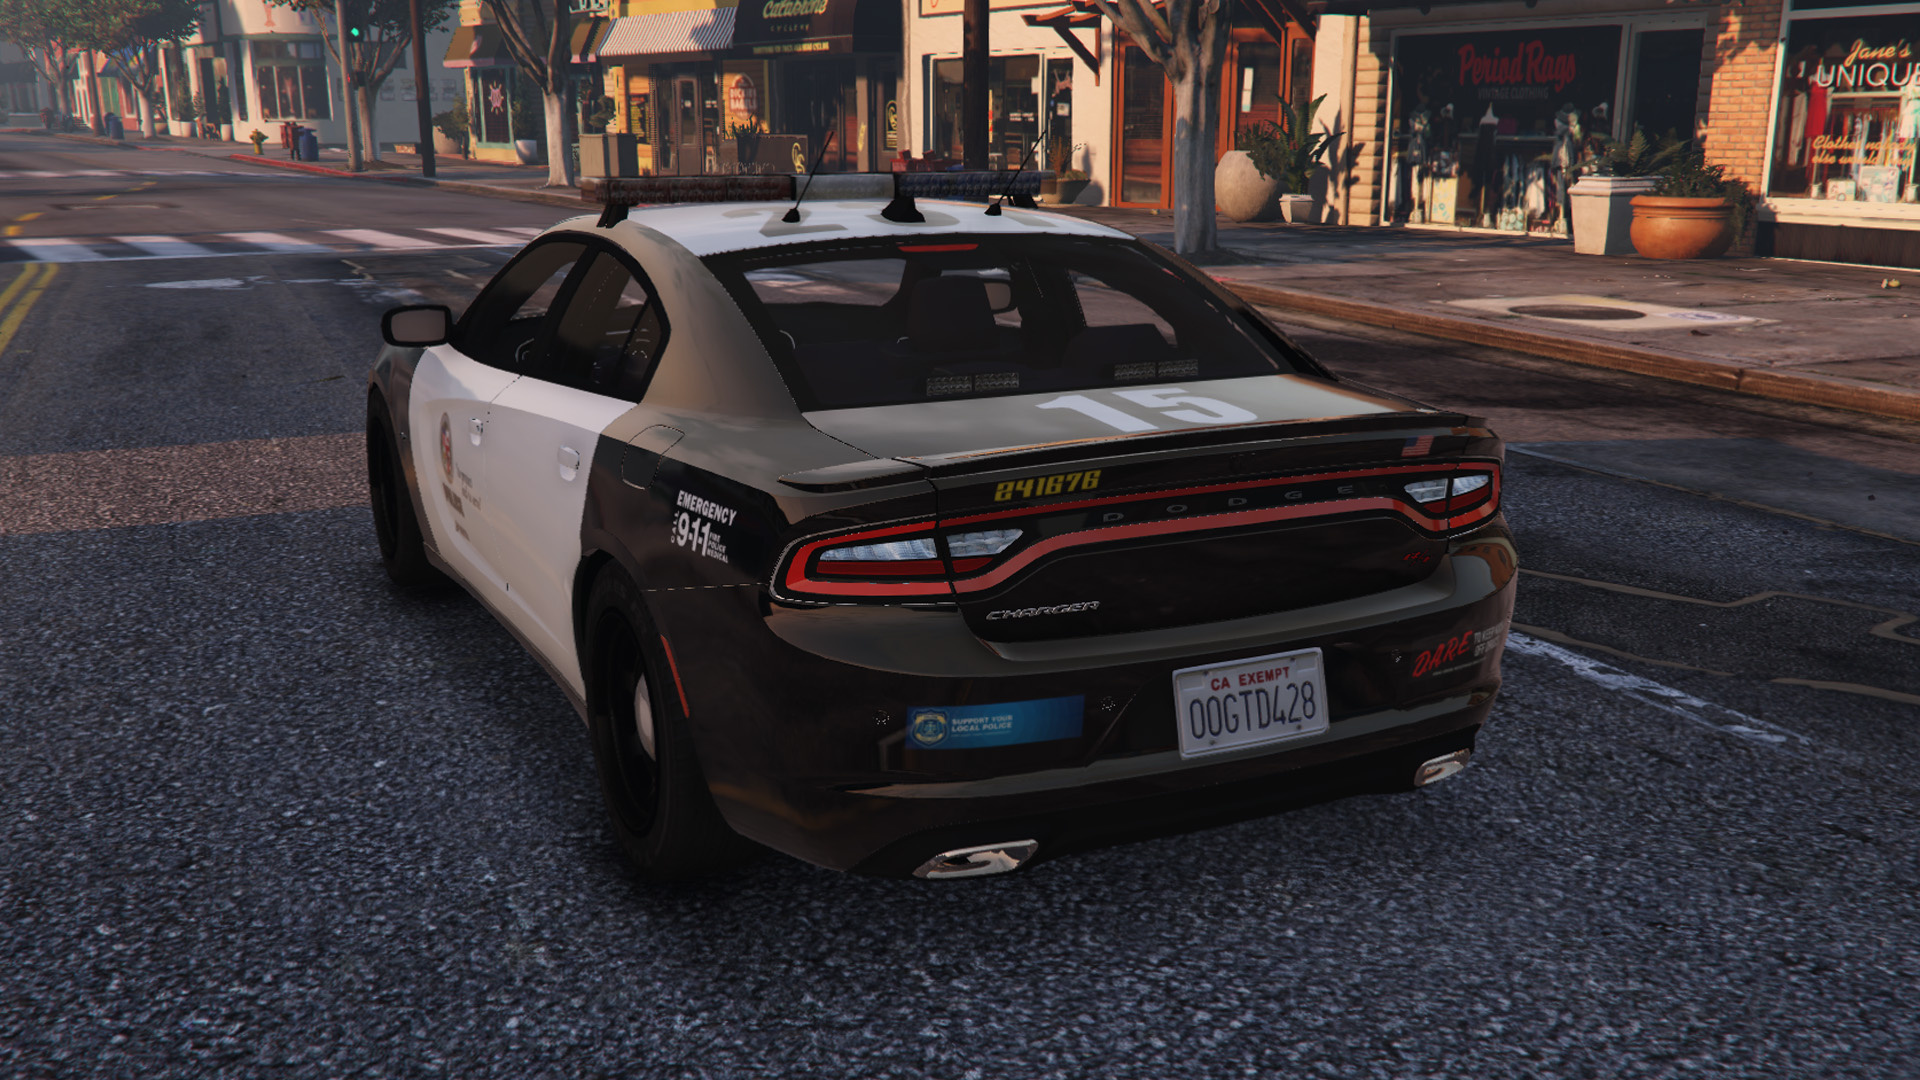 Lapd Inspired Charger Paint Job Gta 5 Mods